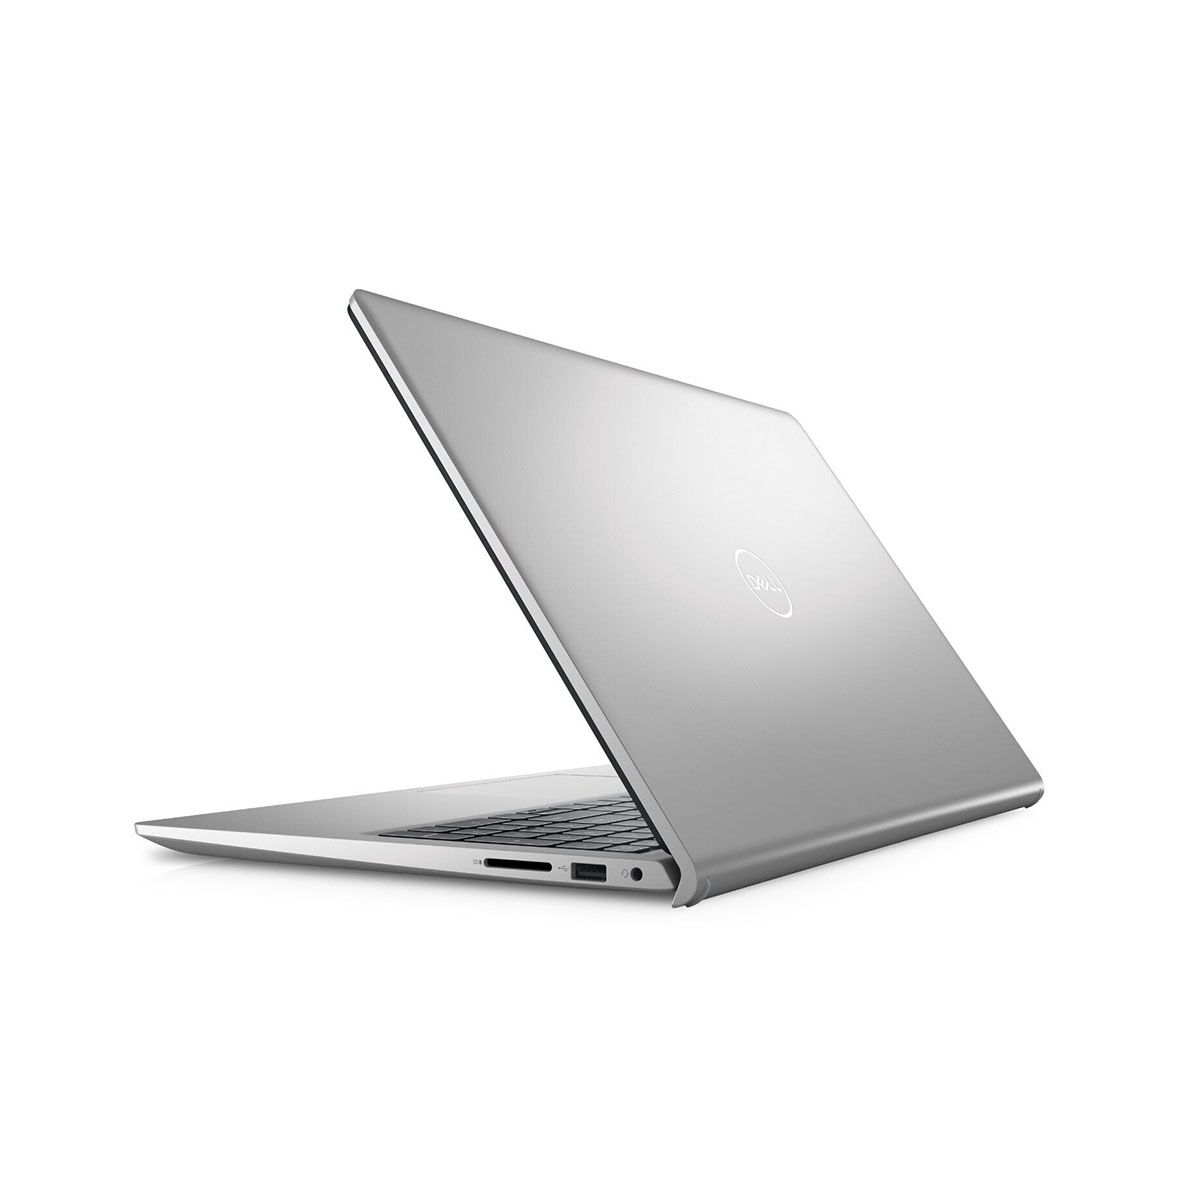 Specs and Info] Dell Inspiron 15 3515: A work from home laptop